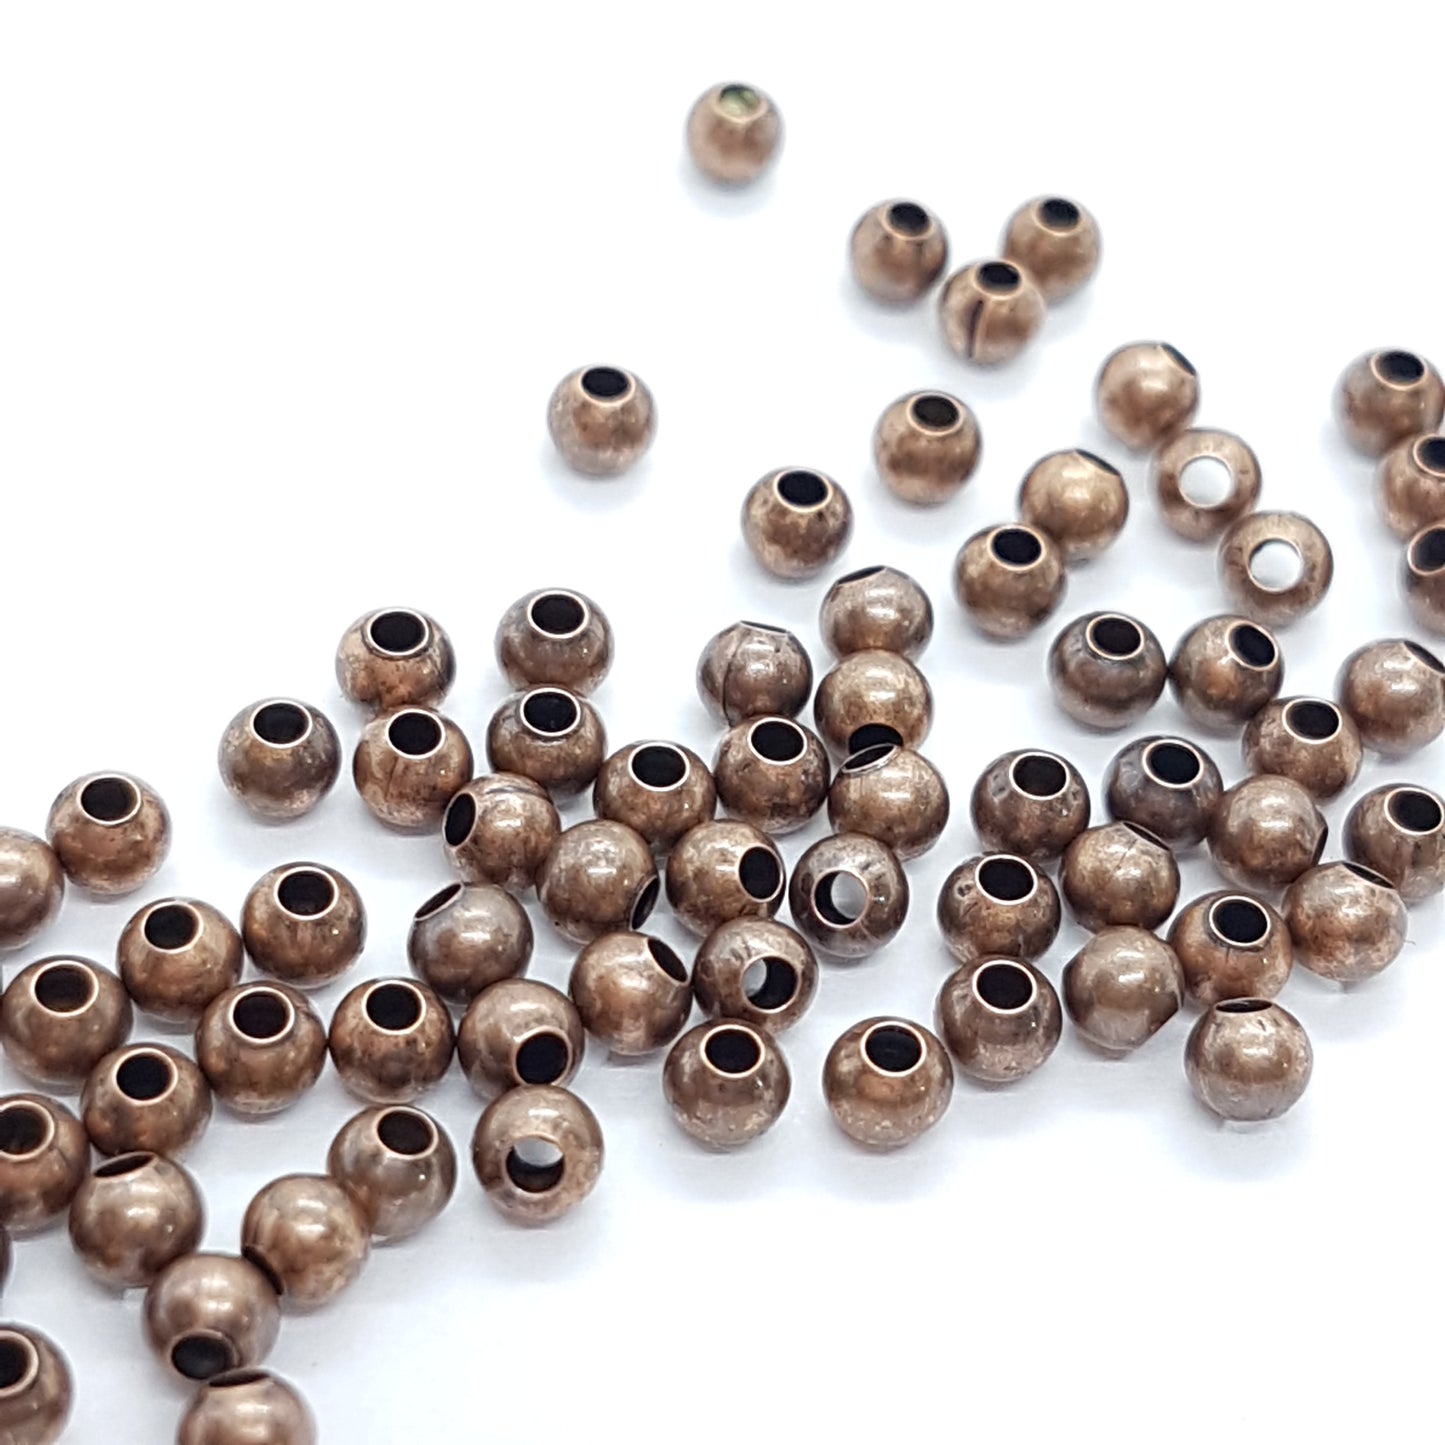 100pc Antique Copper Spacer Beads 3mm